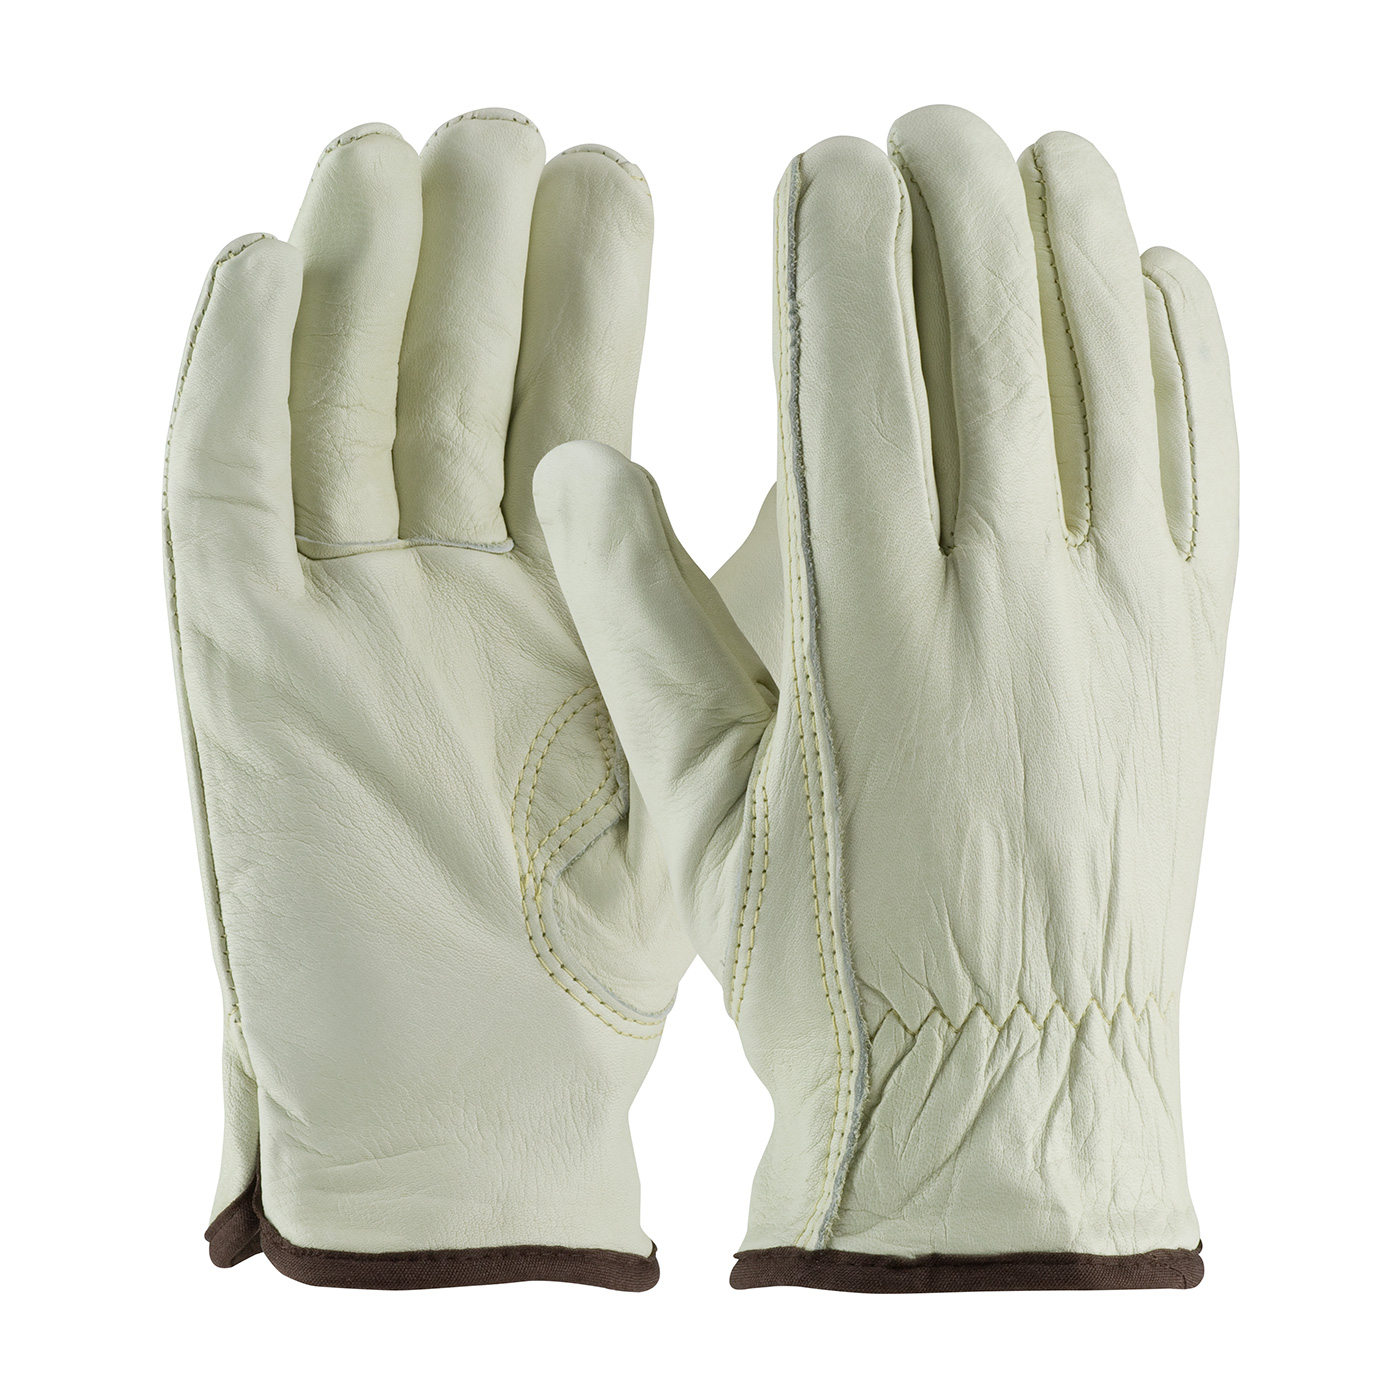 PIP® Regular Grade Top Grain Cowhide Leather Glove with White Thermal Lining and Keystone Thumb #77-265